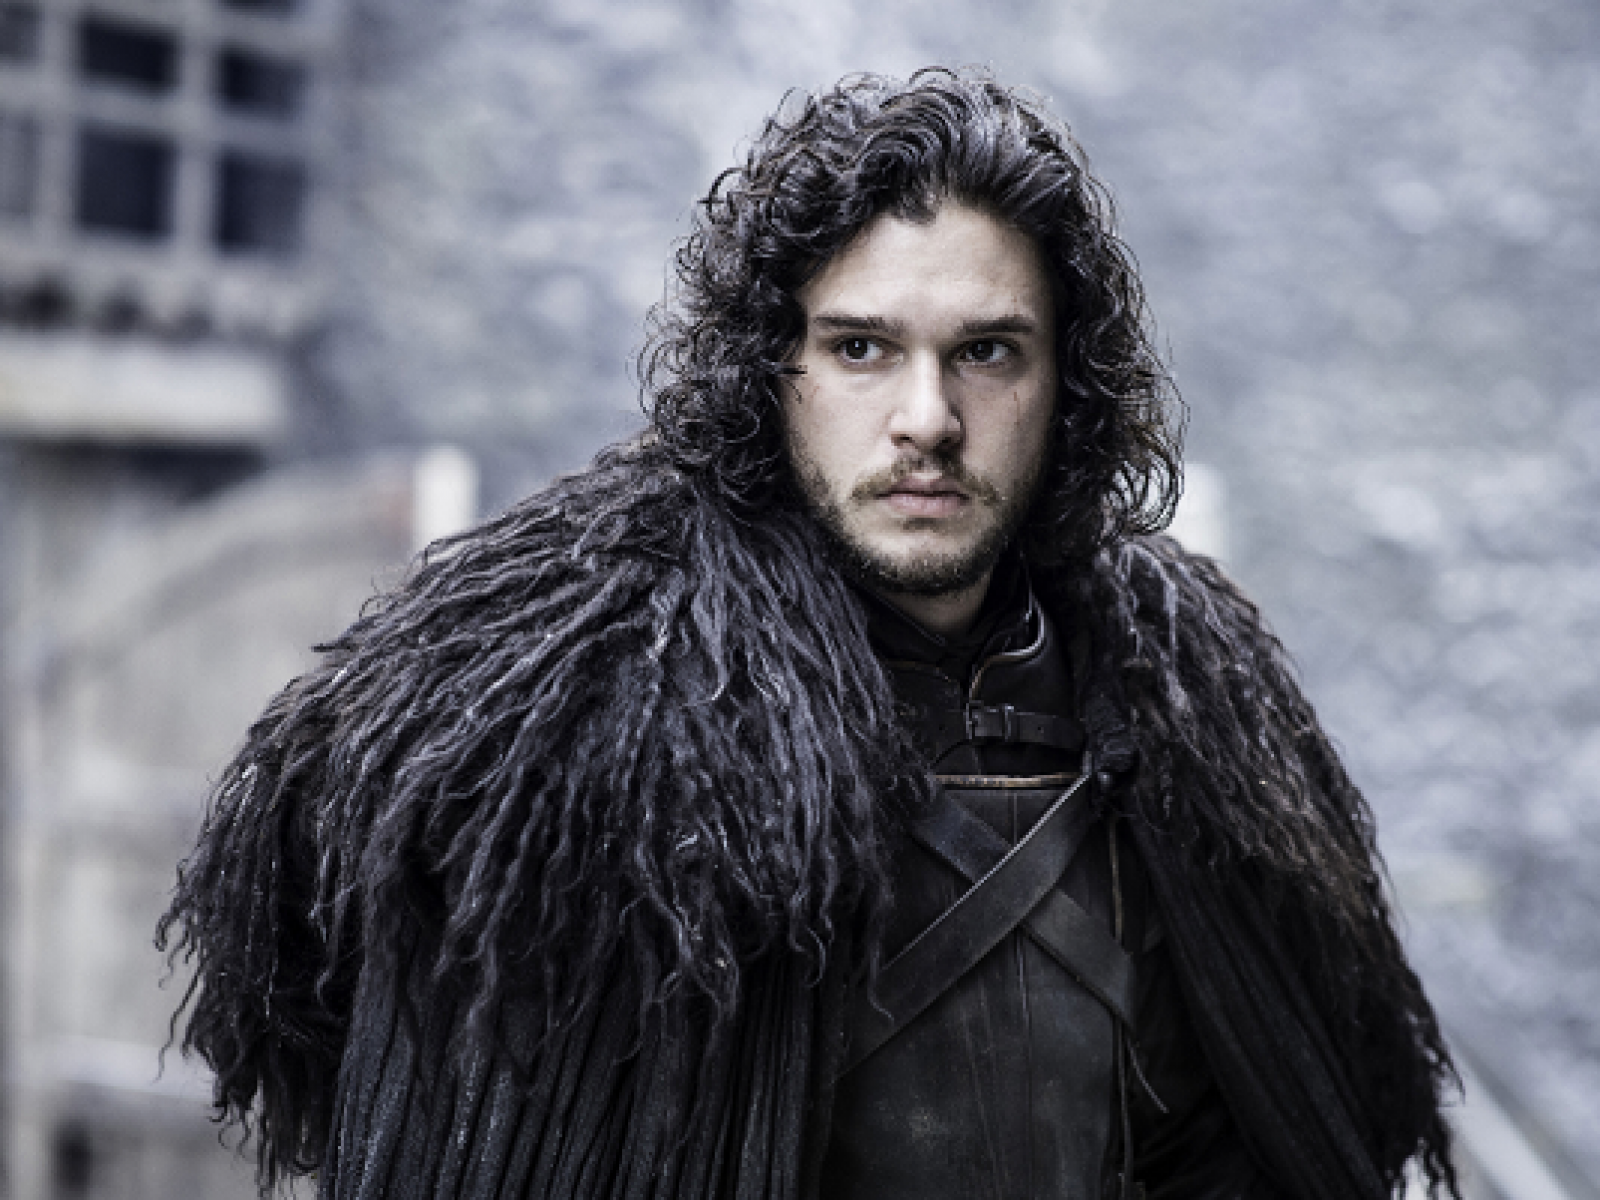 Is Jon Snow King Of The Wildlings Now Fans React To Game Of Thrones Character Abandoning The Wall In Season 8 Finale